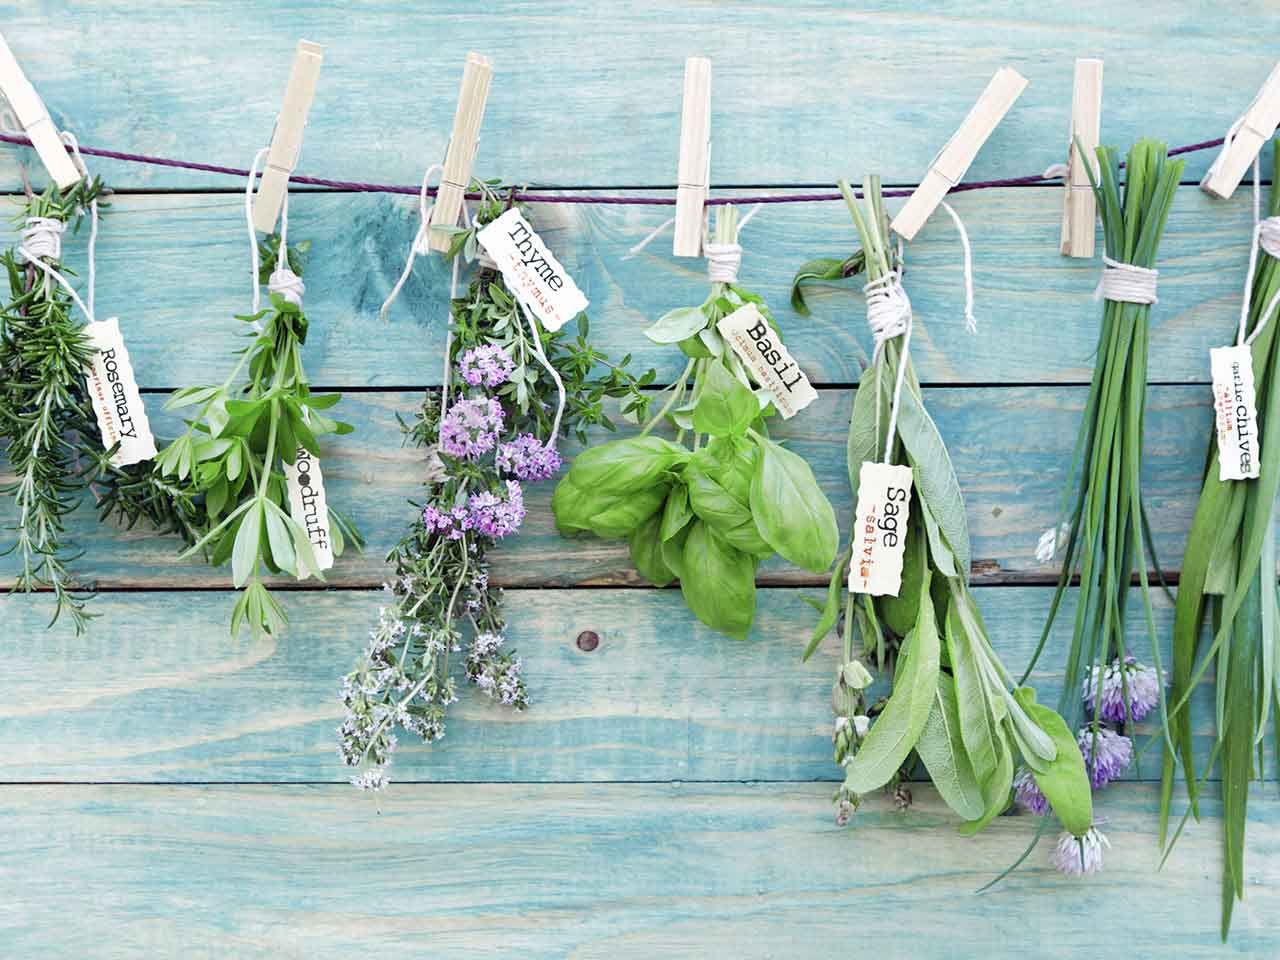 Herbs hanging up against a wooden wall